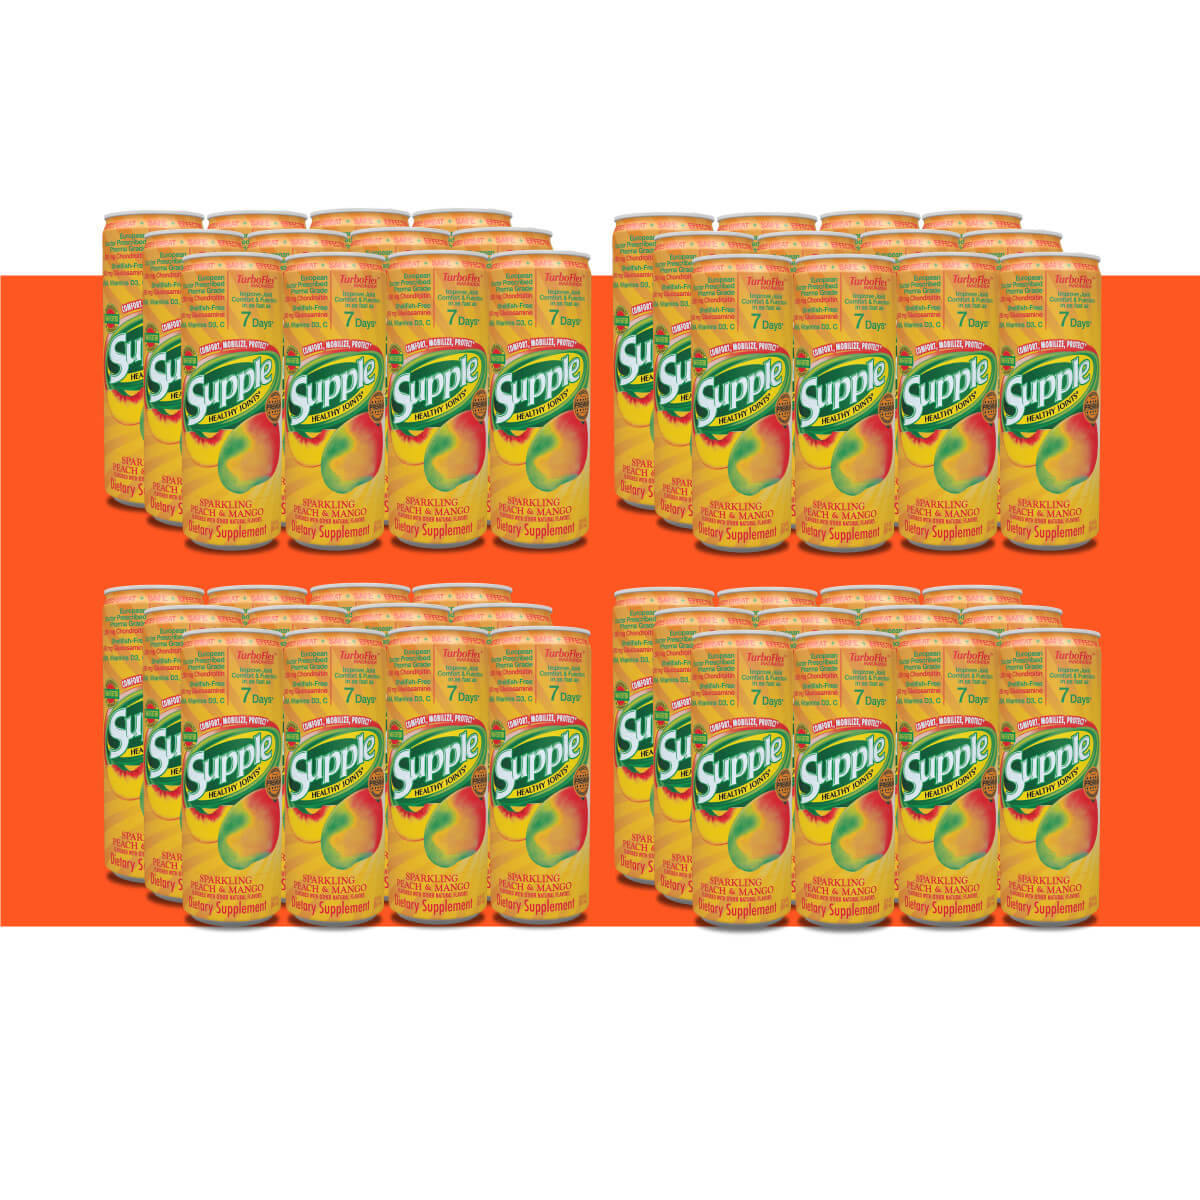 Supple Drink with glucosamine 4 cases, 48 cans, with orange stripe. Tip: Strong muscles help knee pain relief.